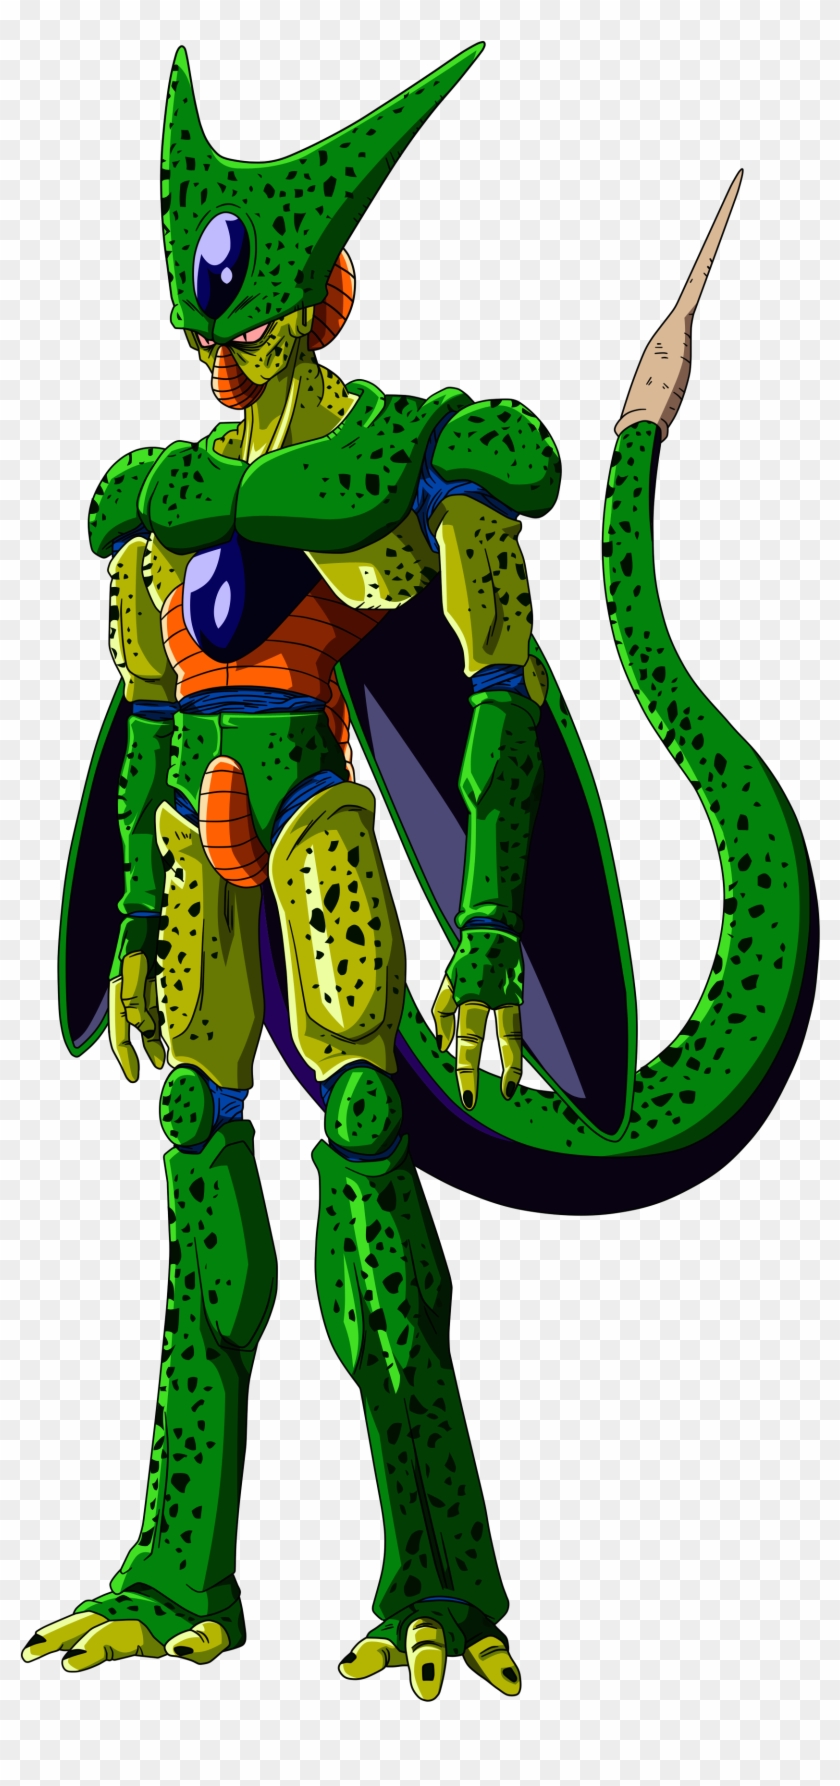 Cell First Form - Cell Dragon Ball Z #640203